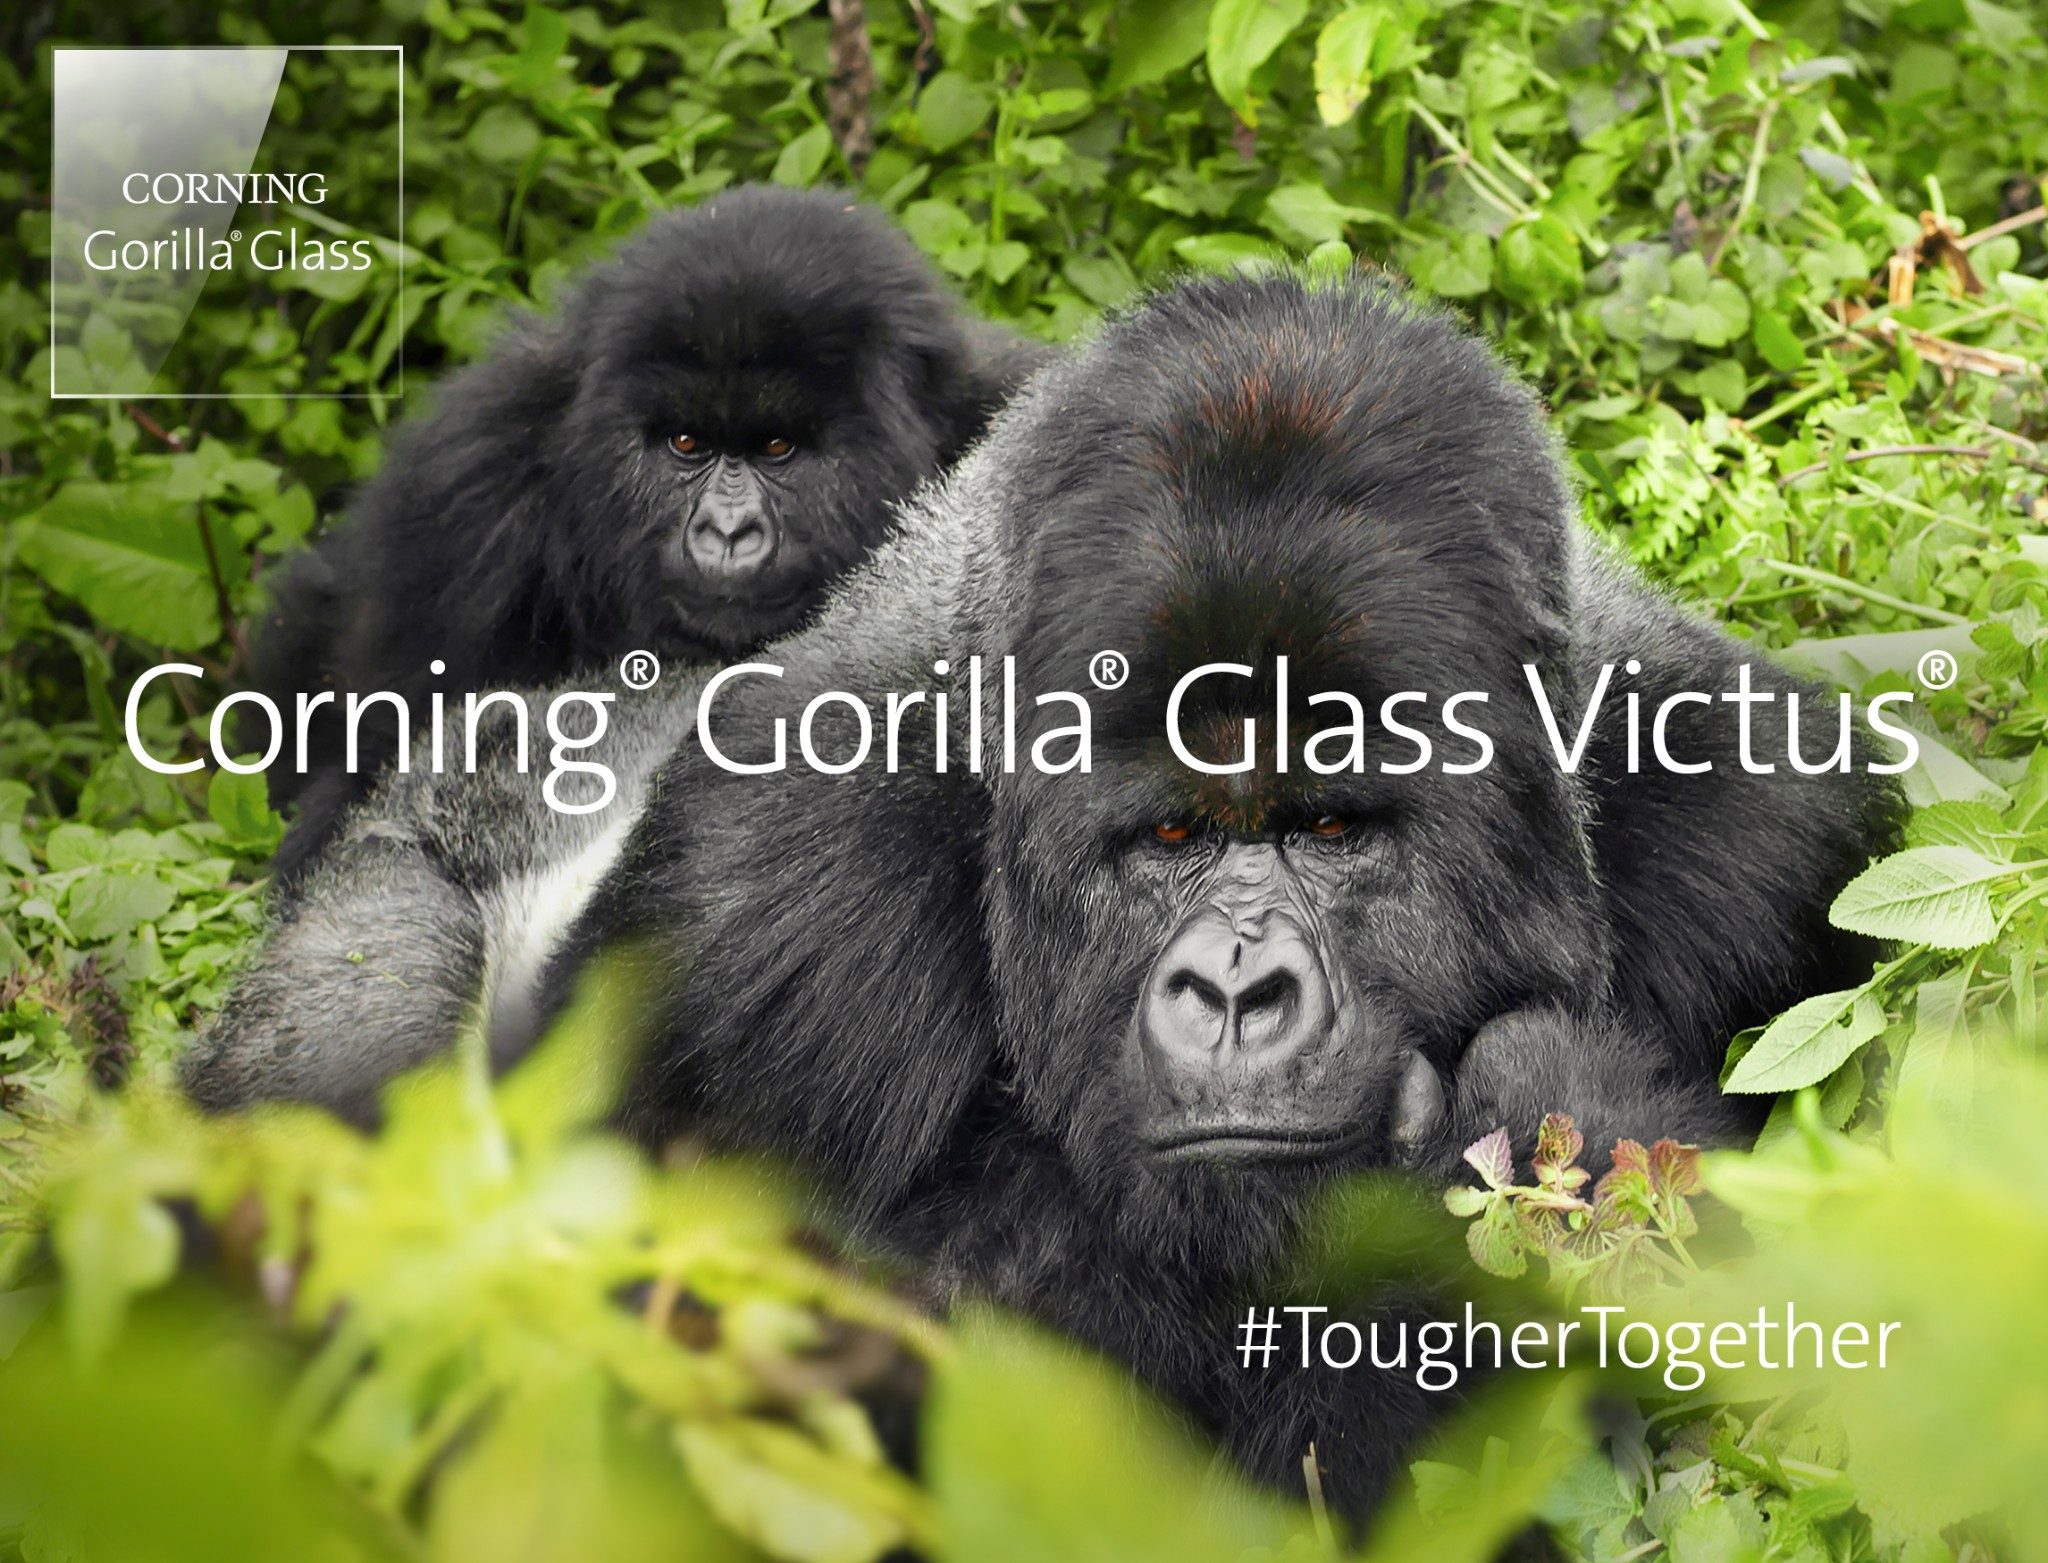 How tough Corning’s Gorilla Glass Victus is? and how much meter it can survive when dropped?